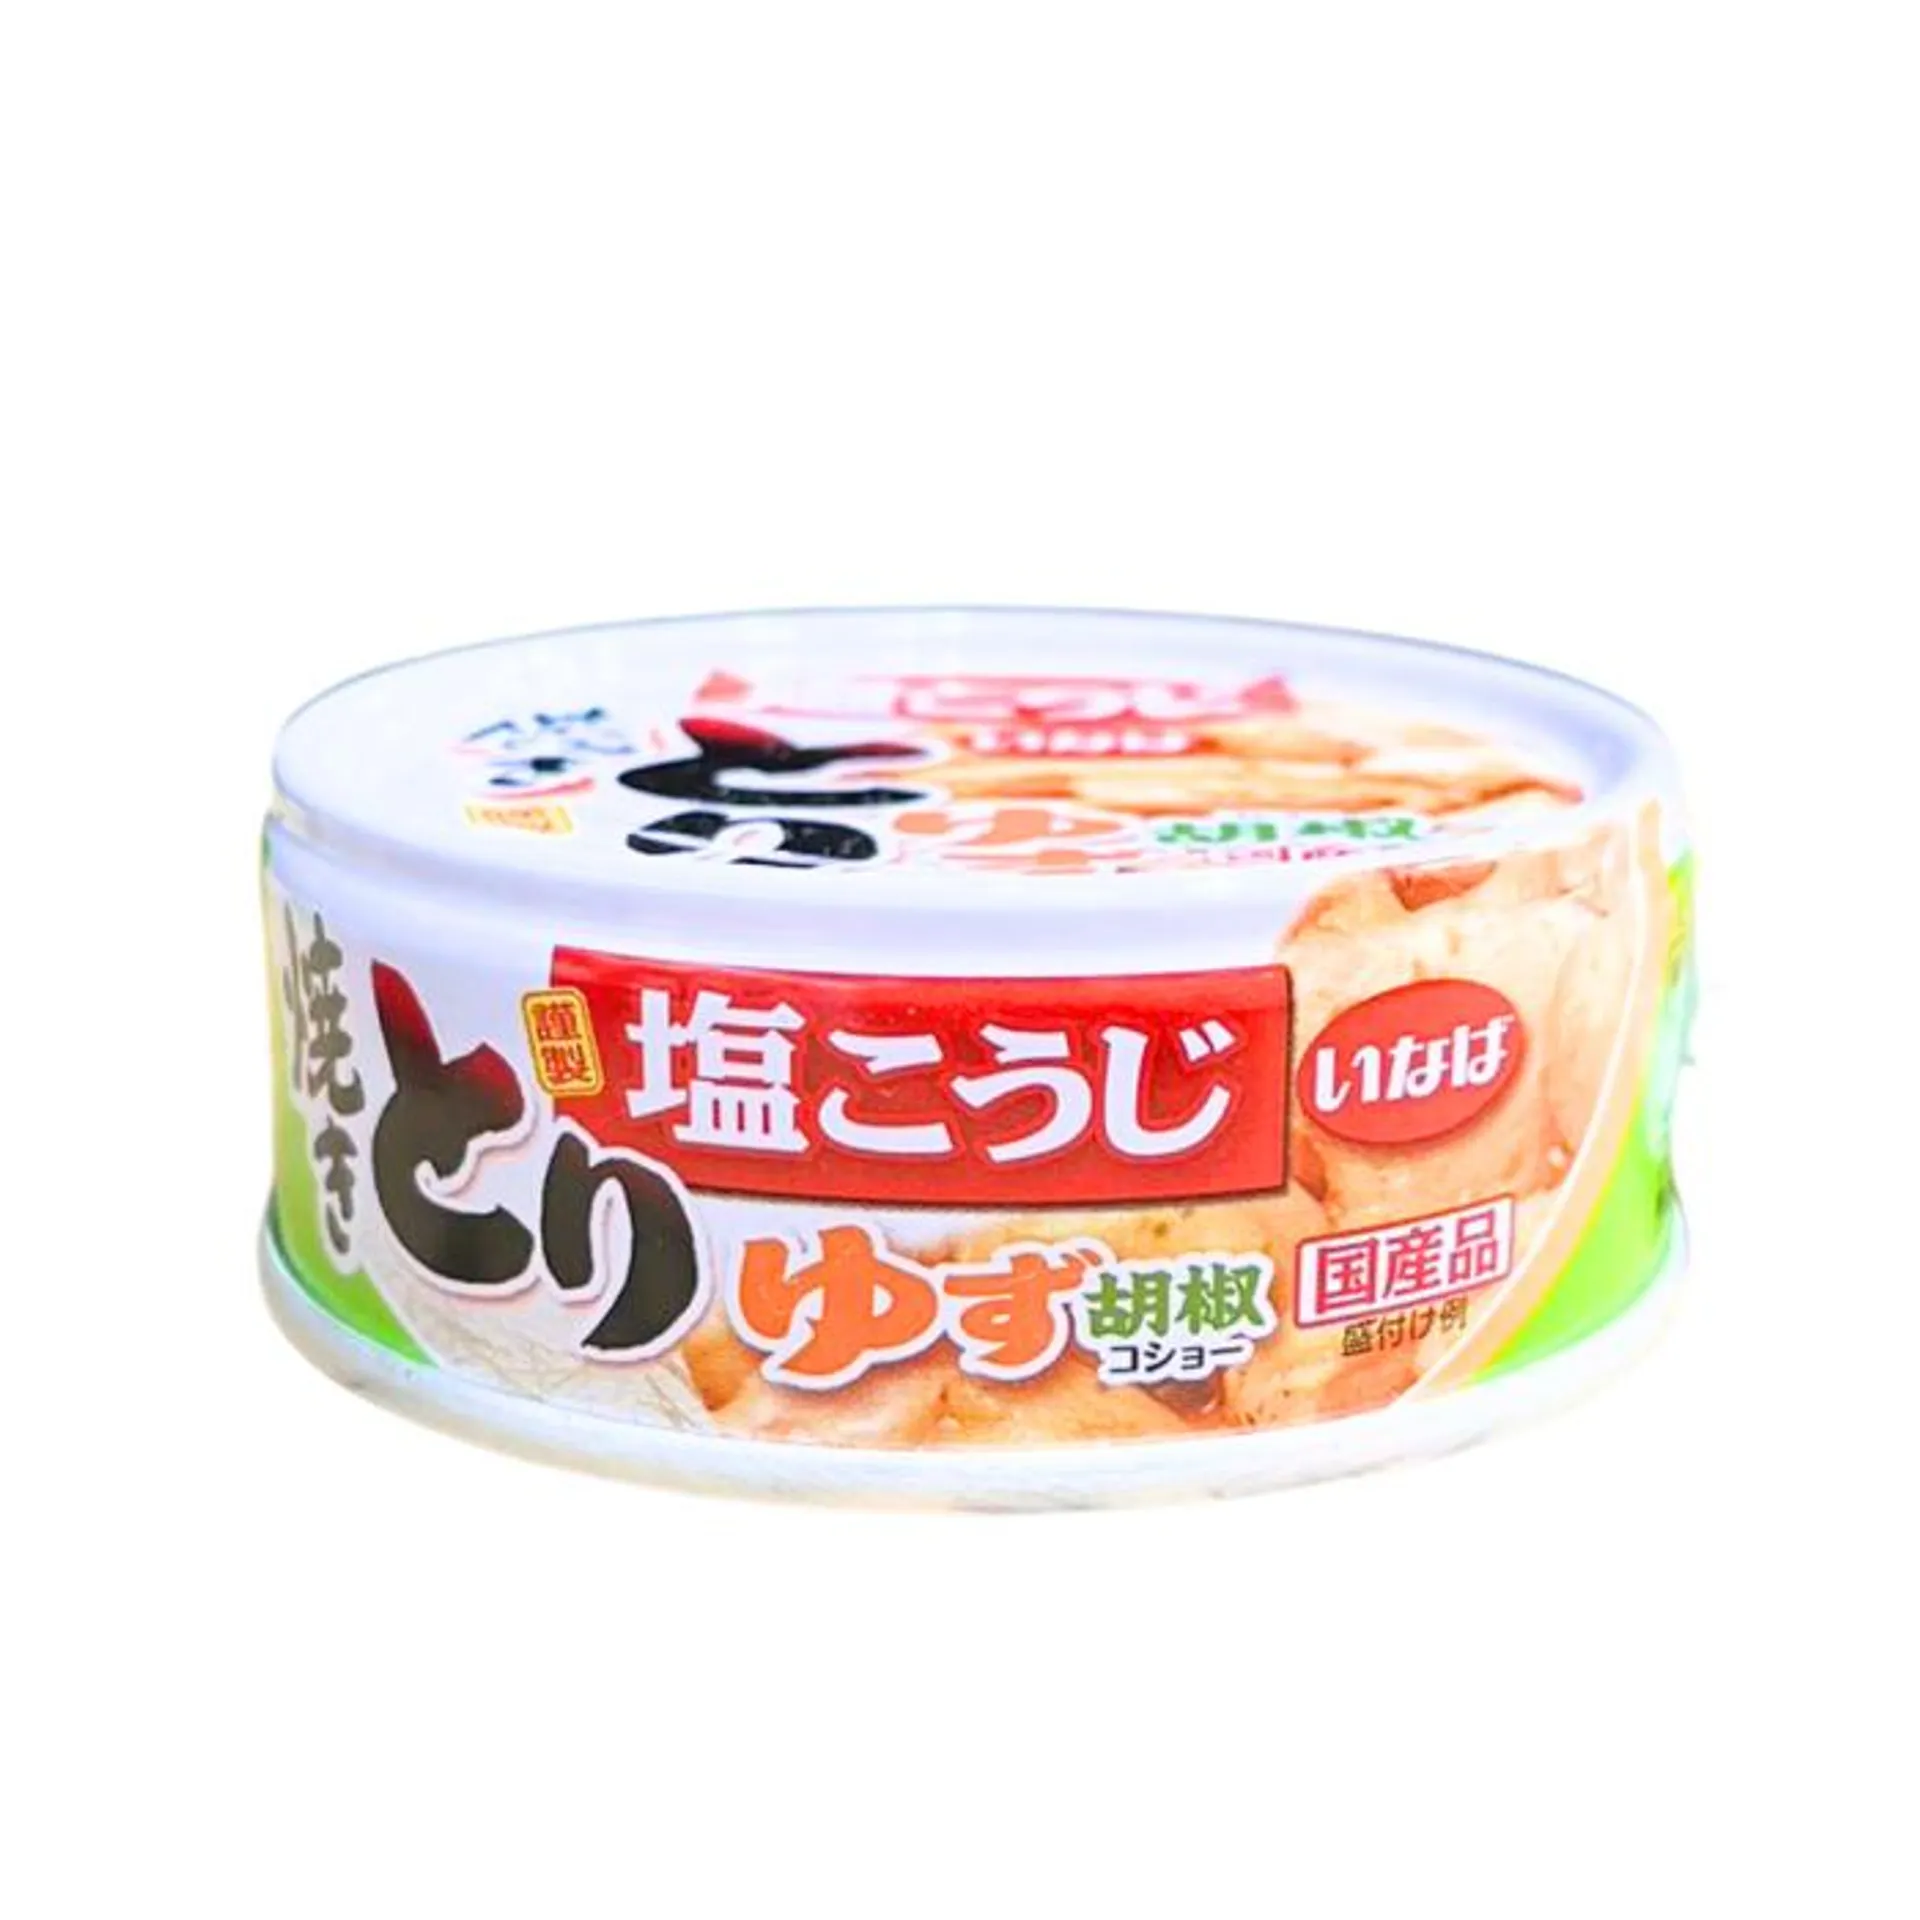 INABA FOODS / TORI YUZU PEPPER FLAVOR / CANNED COOKED CHICKEN 65g